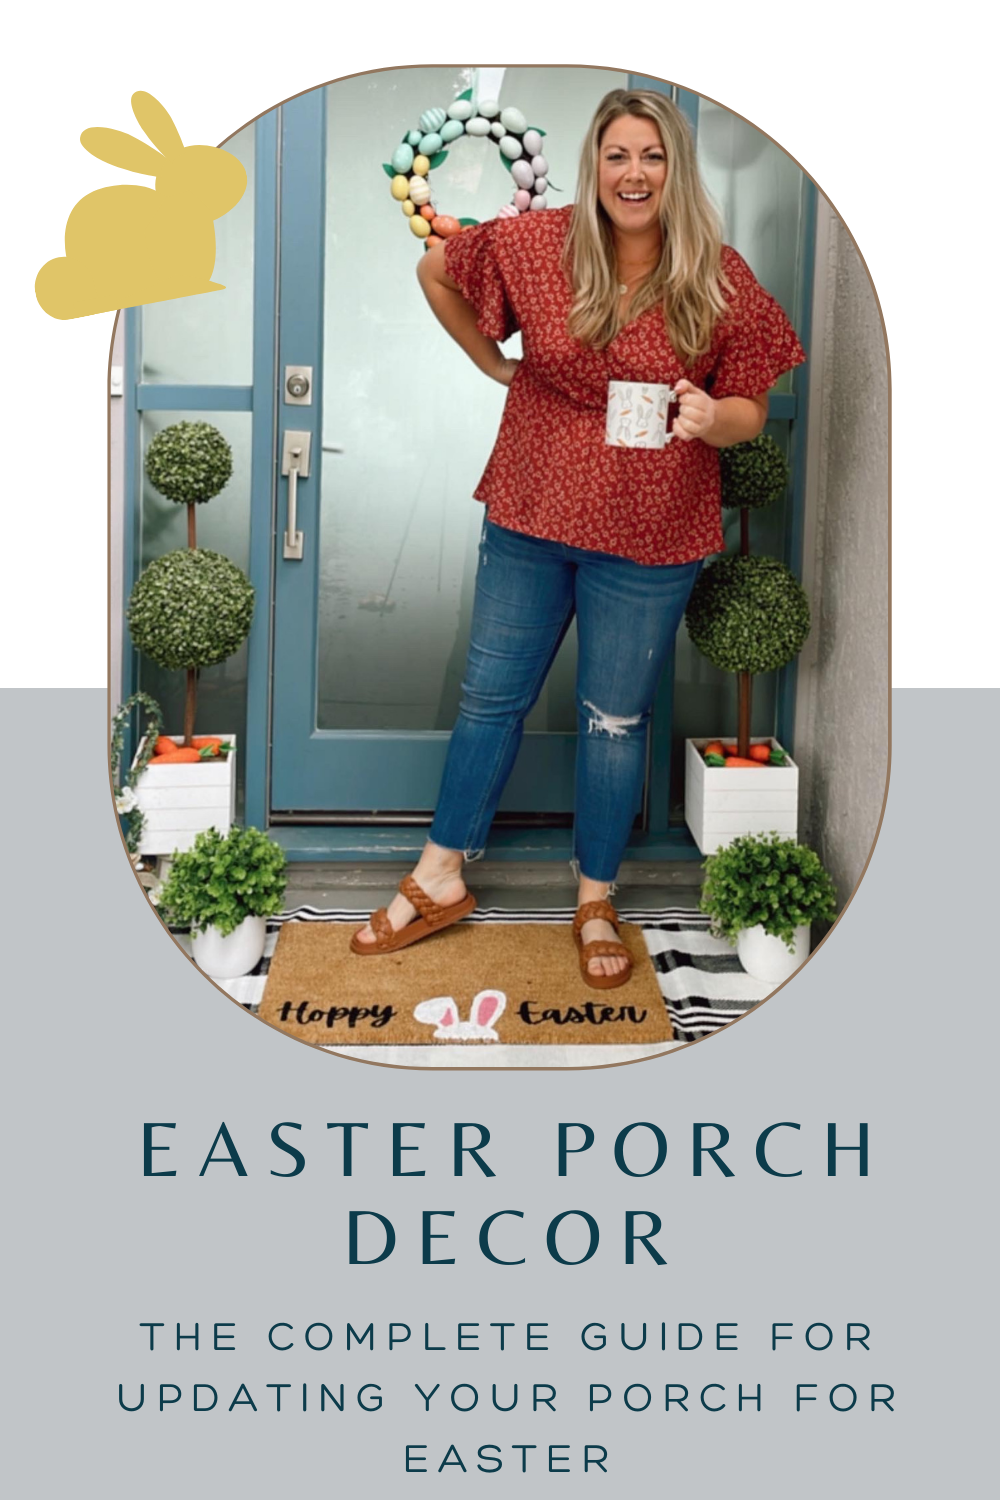 How to decorate your porch for Easter!